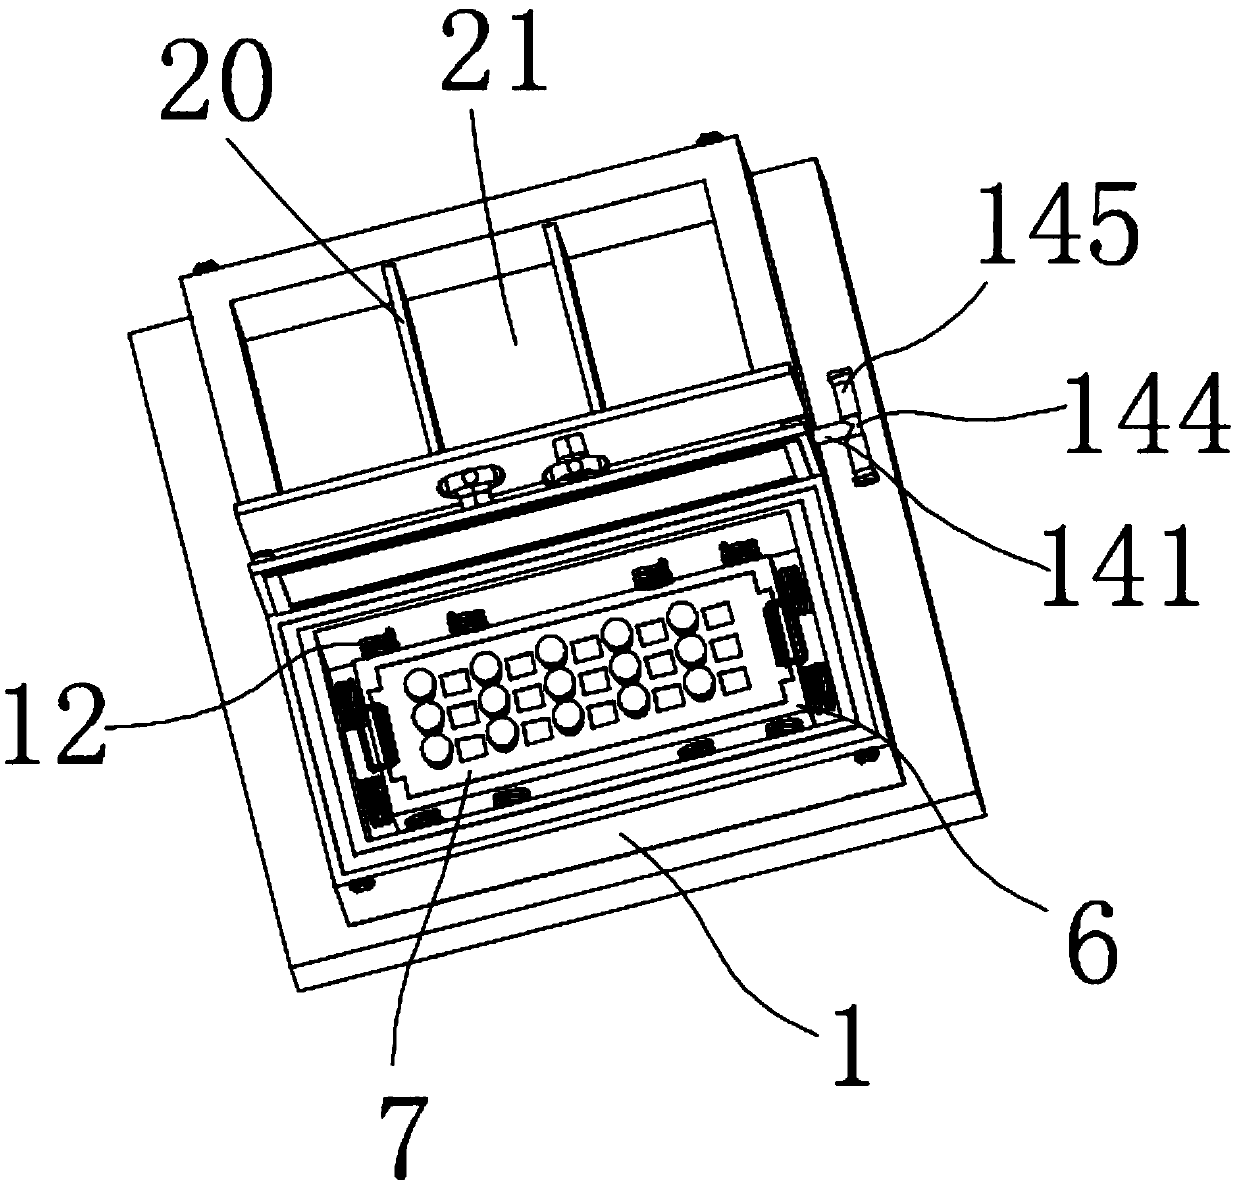 Cell preservation device for cell engineering and convenient to carry